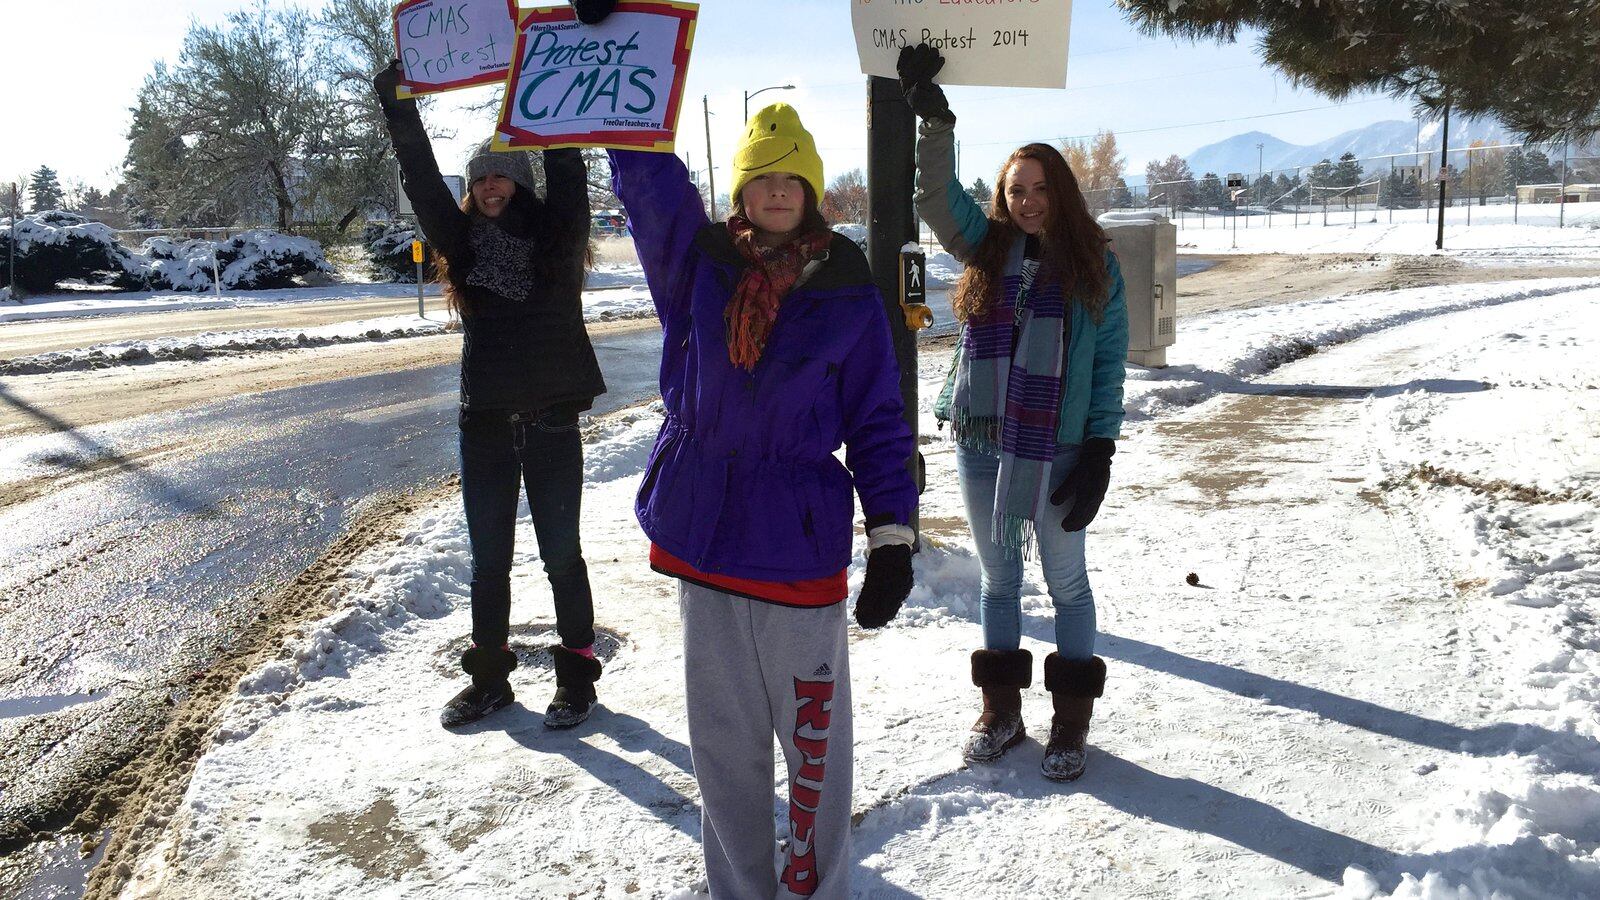 Seniors at Fairview High School in Boulder protested a standardized test in November 2014. (Photo by Nic Garcia/Chalkbeat)